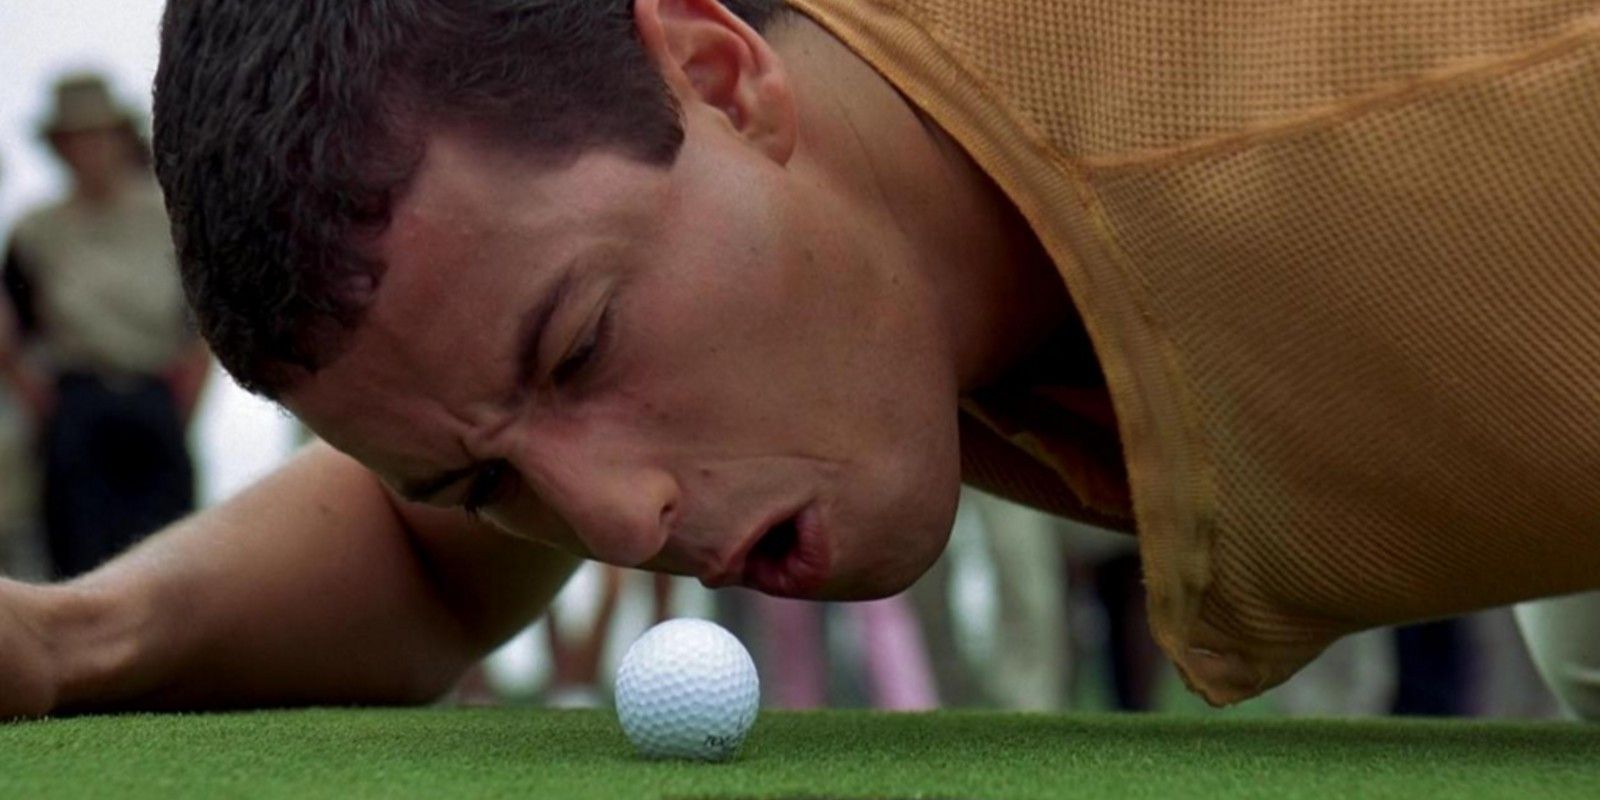 Happy Gilmore - Adam Sandler's character shouts at a golf ball